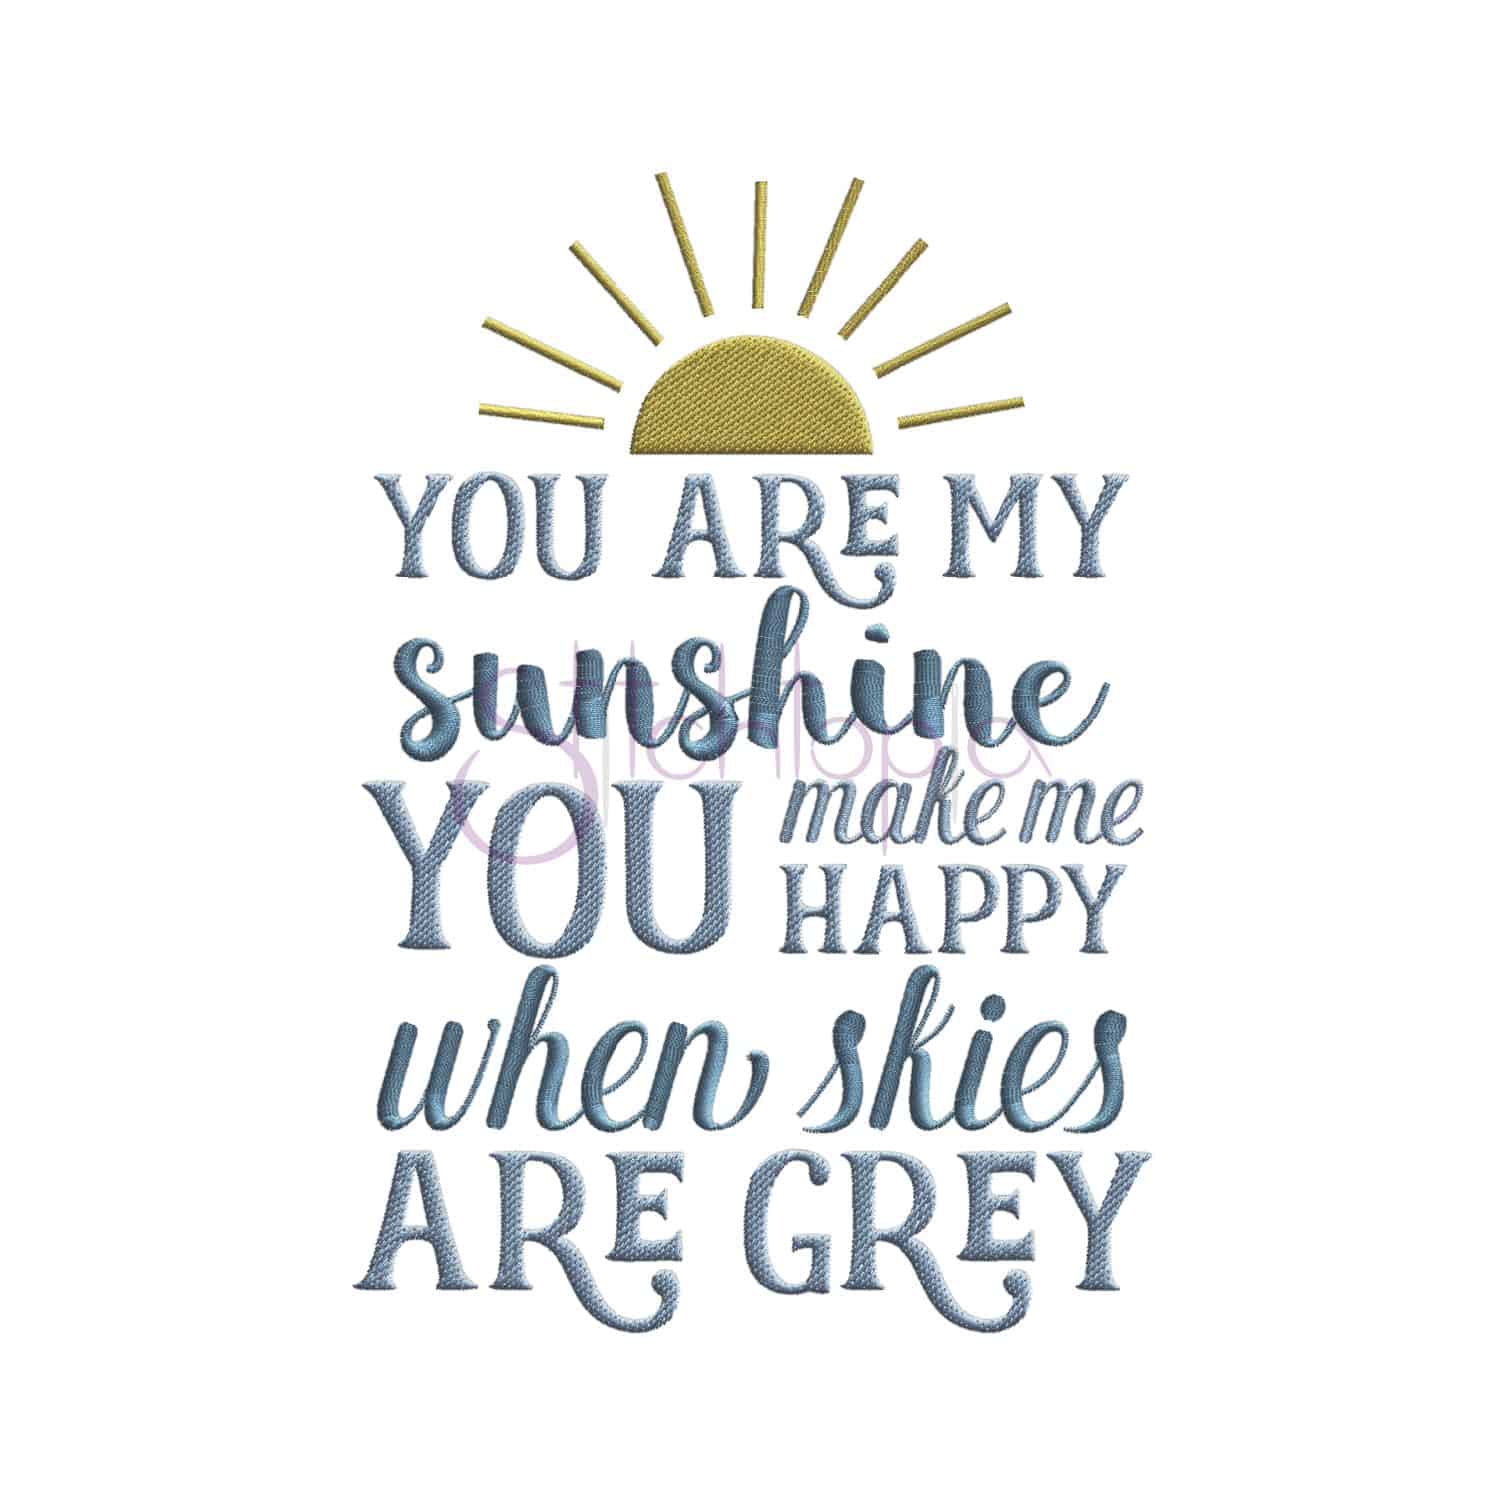 You Are My Sunshine Embroidery Design